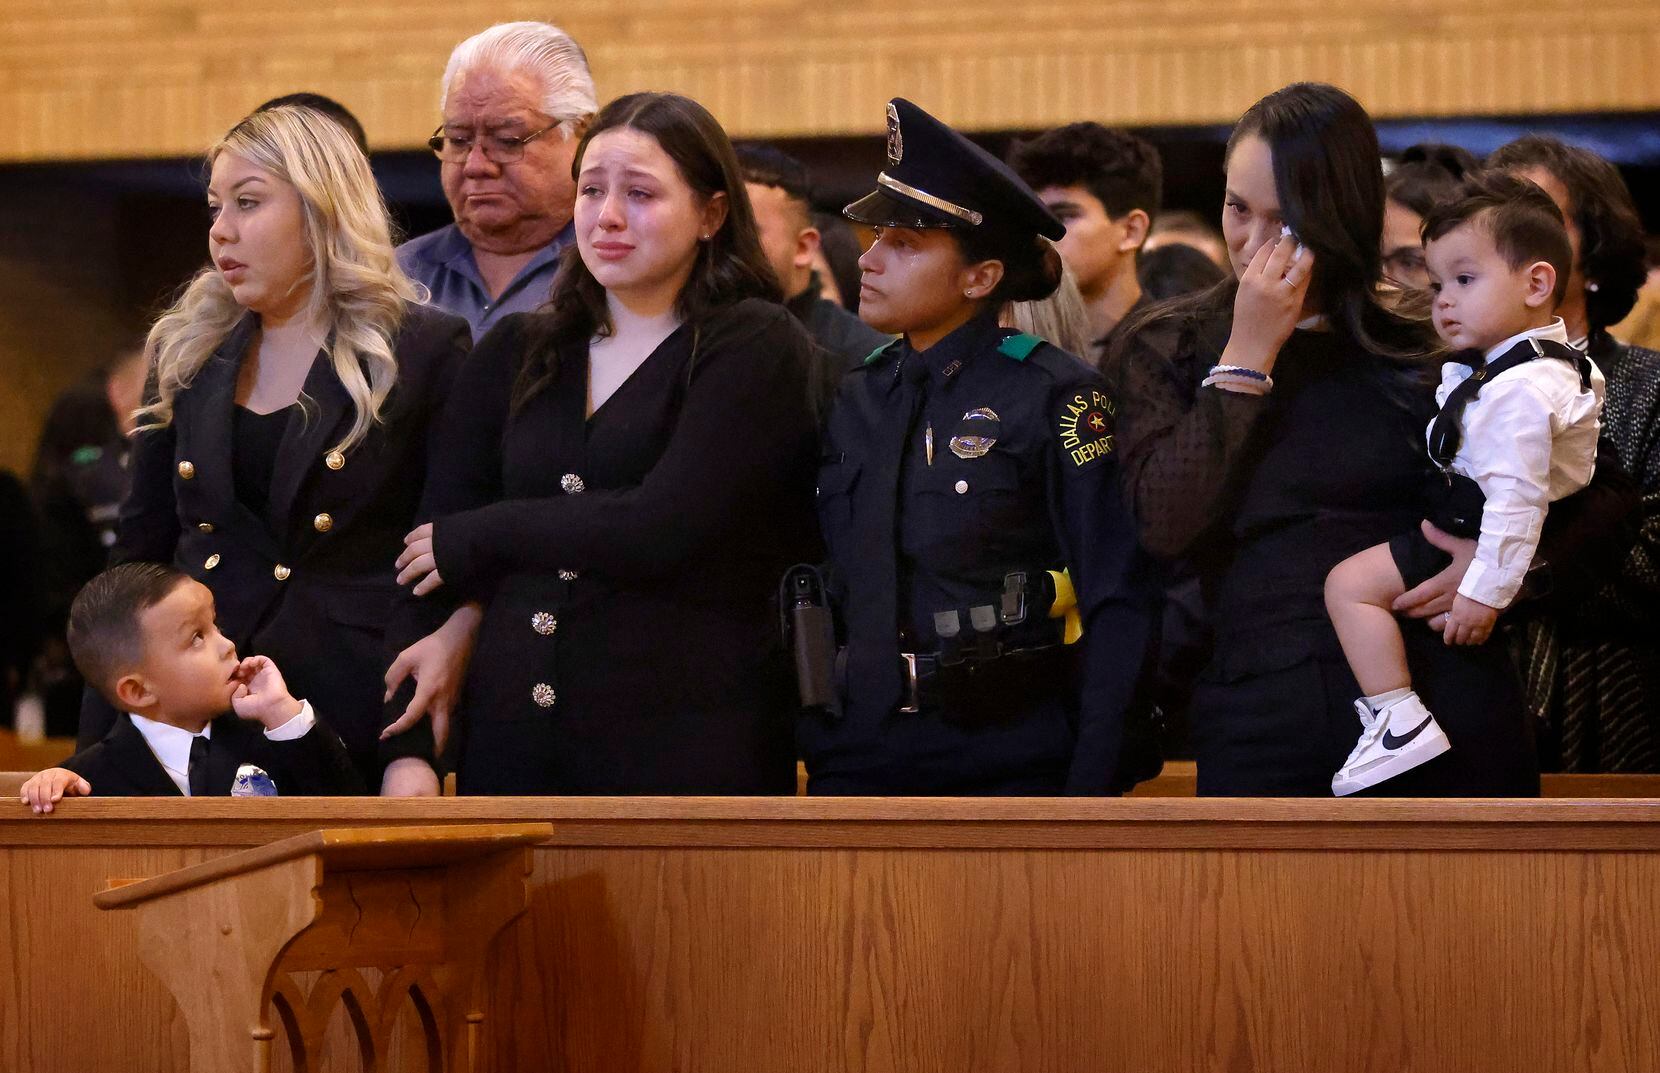 Mia Arellano (center) is comforted by a Dallas Police Officer during the funeral Mass for...